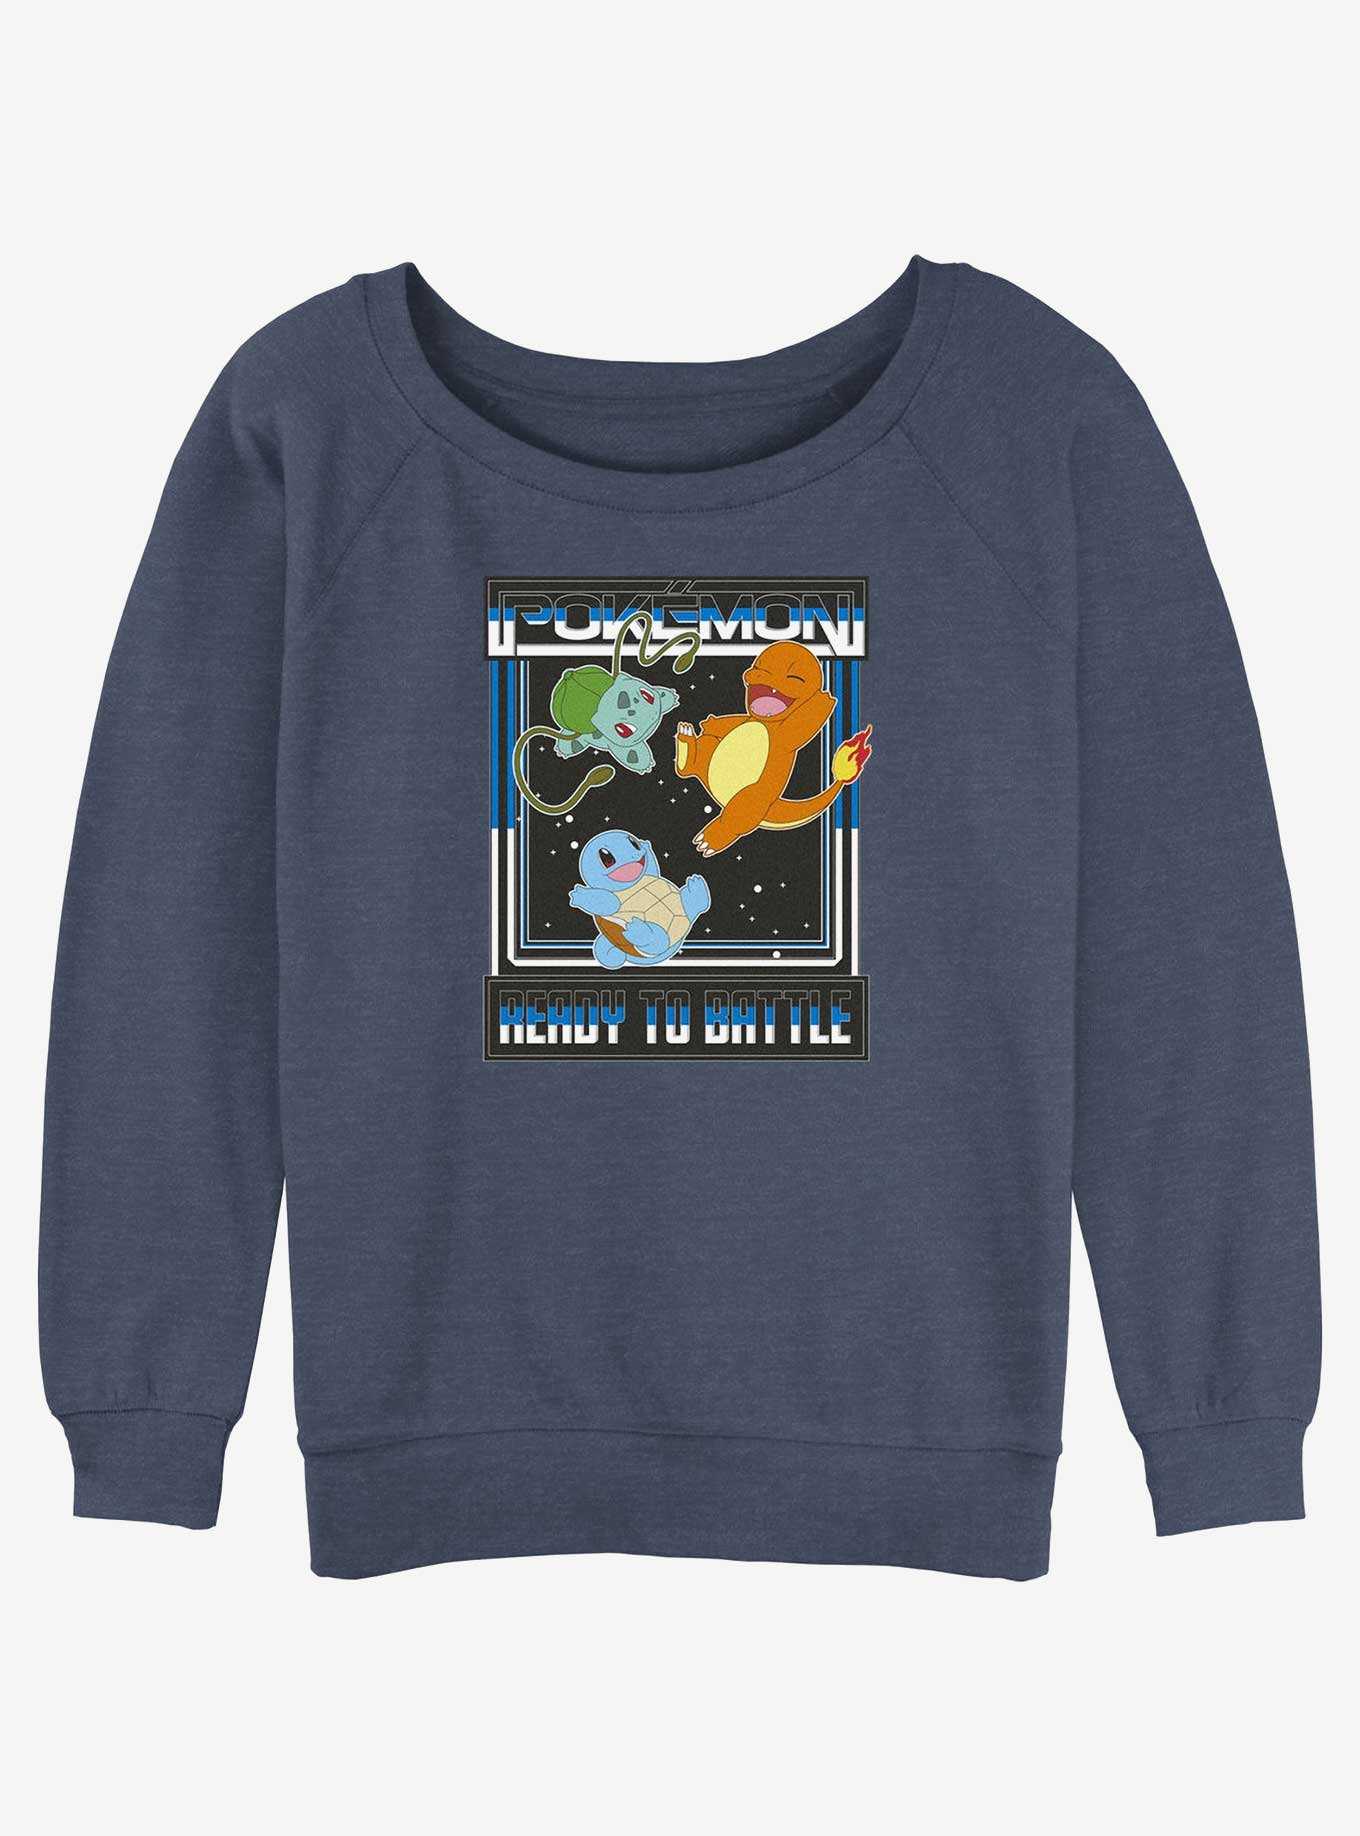 Pokemon Ready To Battle Squirtle, Bulbasaur, and Charmander Slouchy Sweatshirt, , hi-res